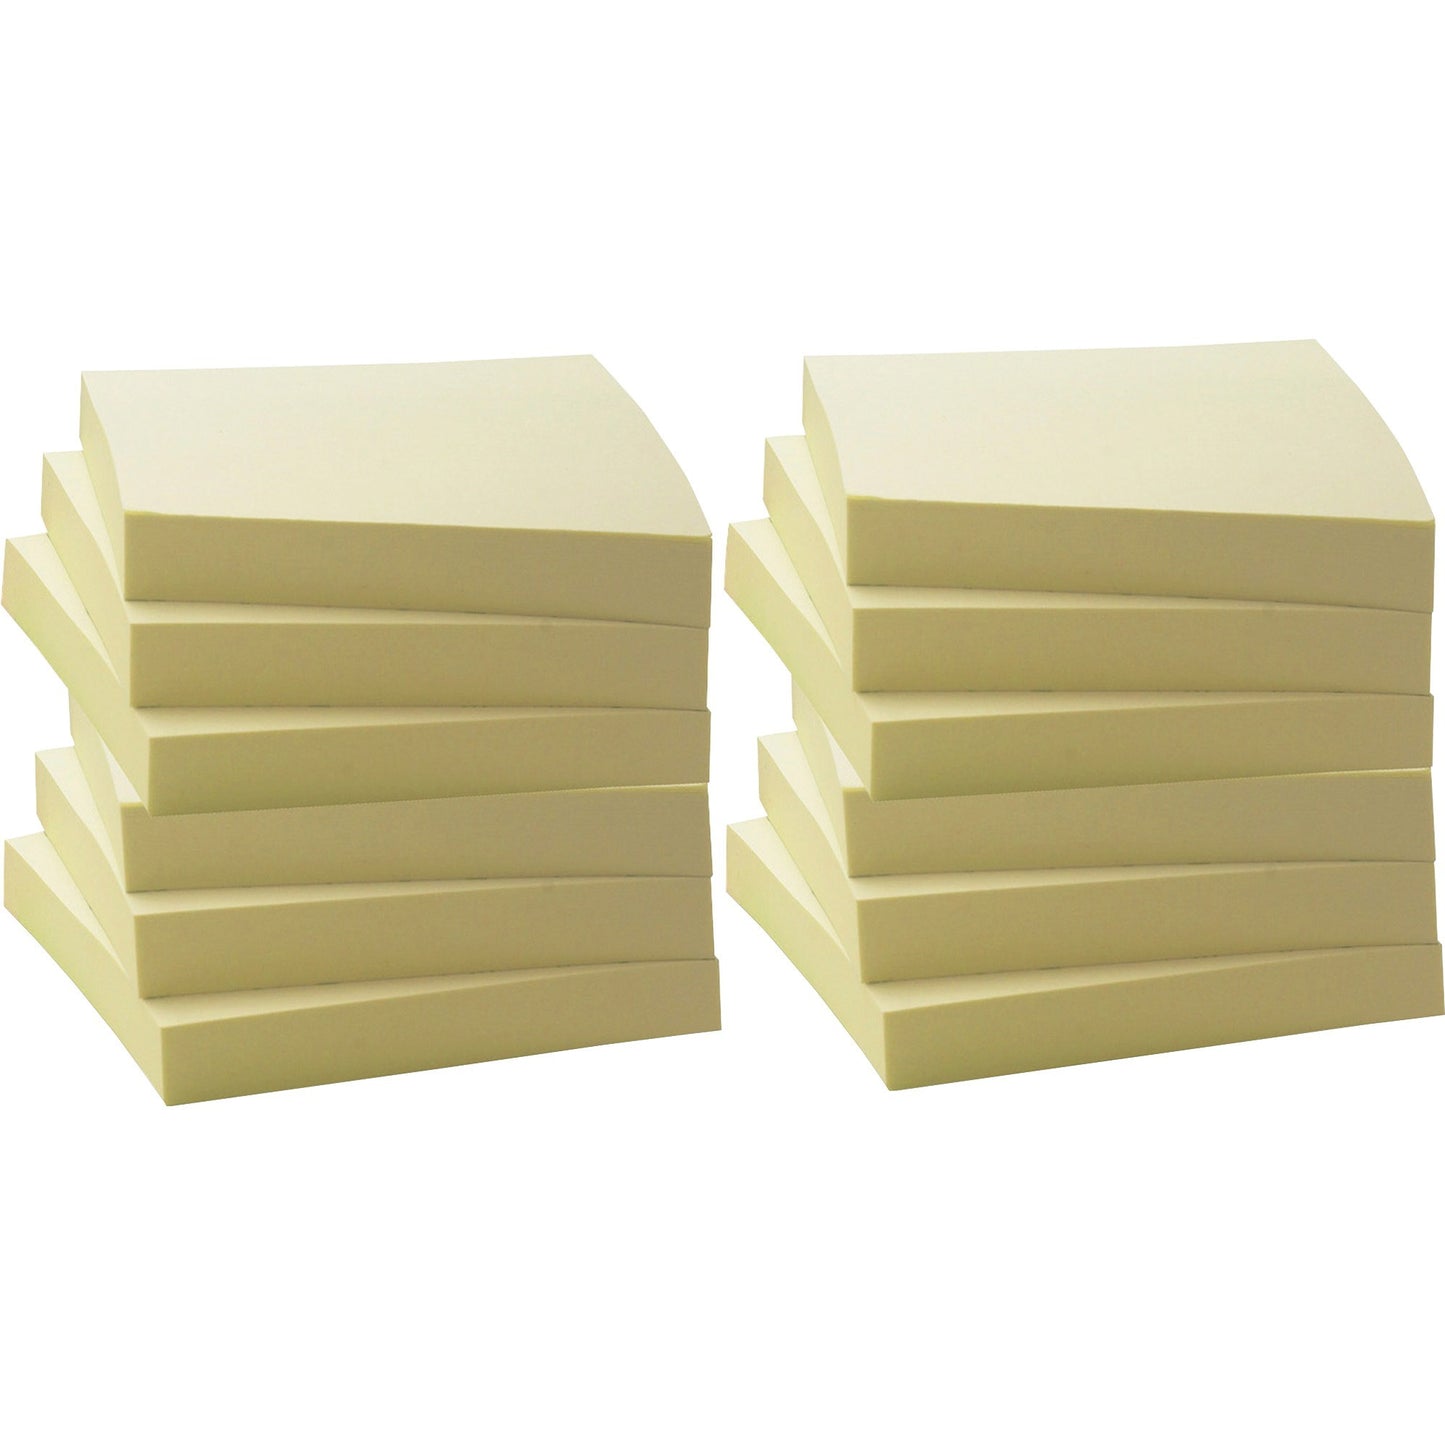 Business Source Yellow Adhesive Notes